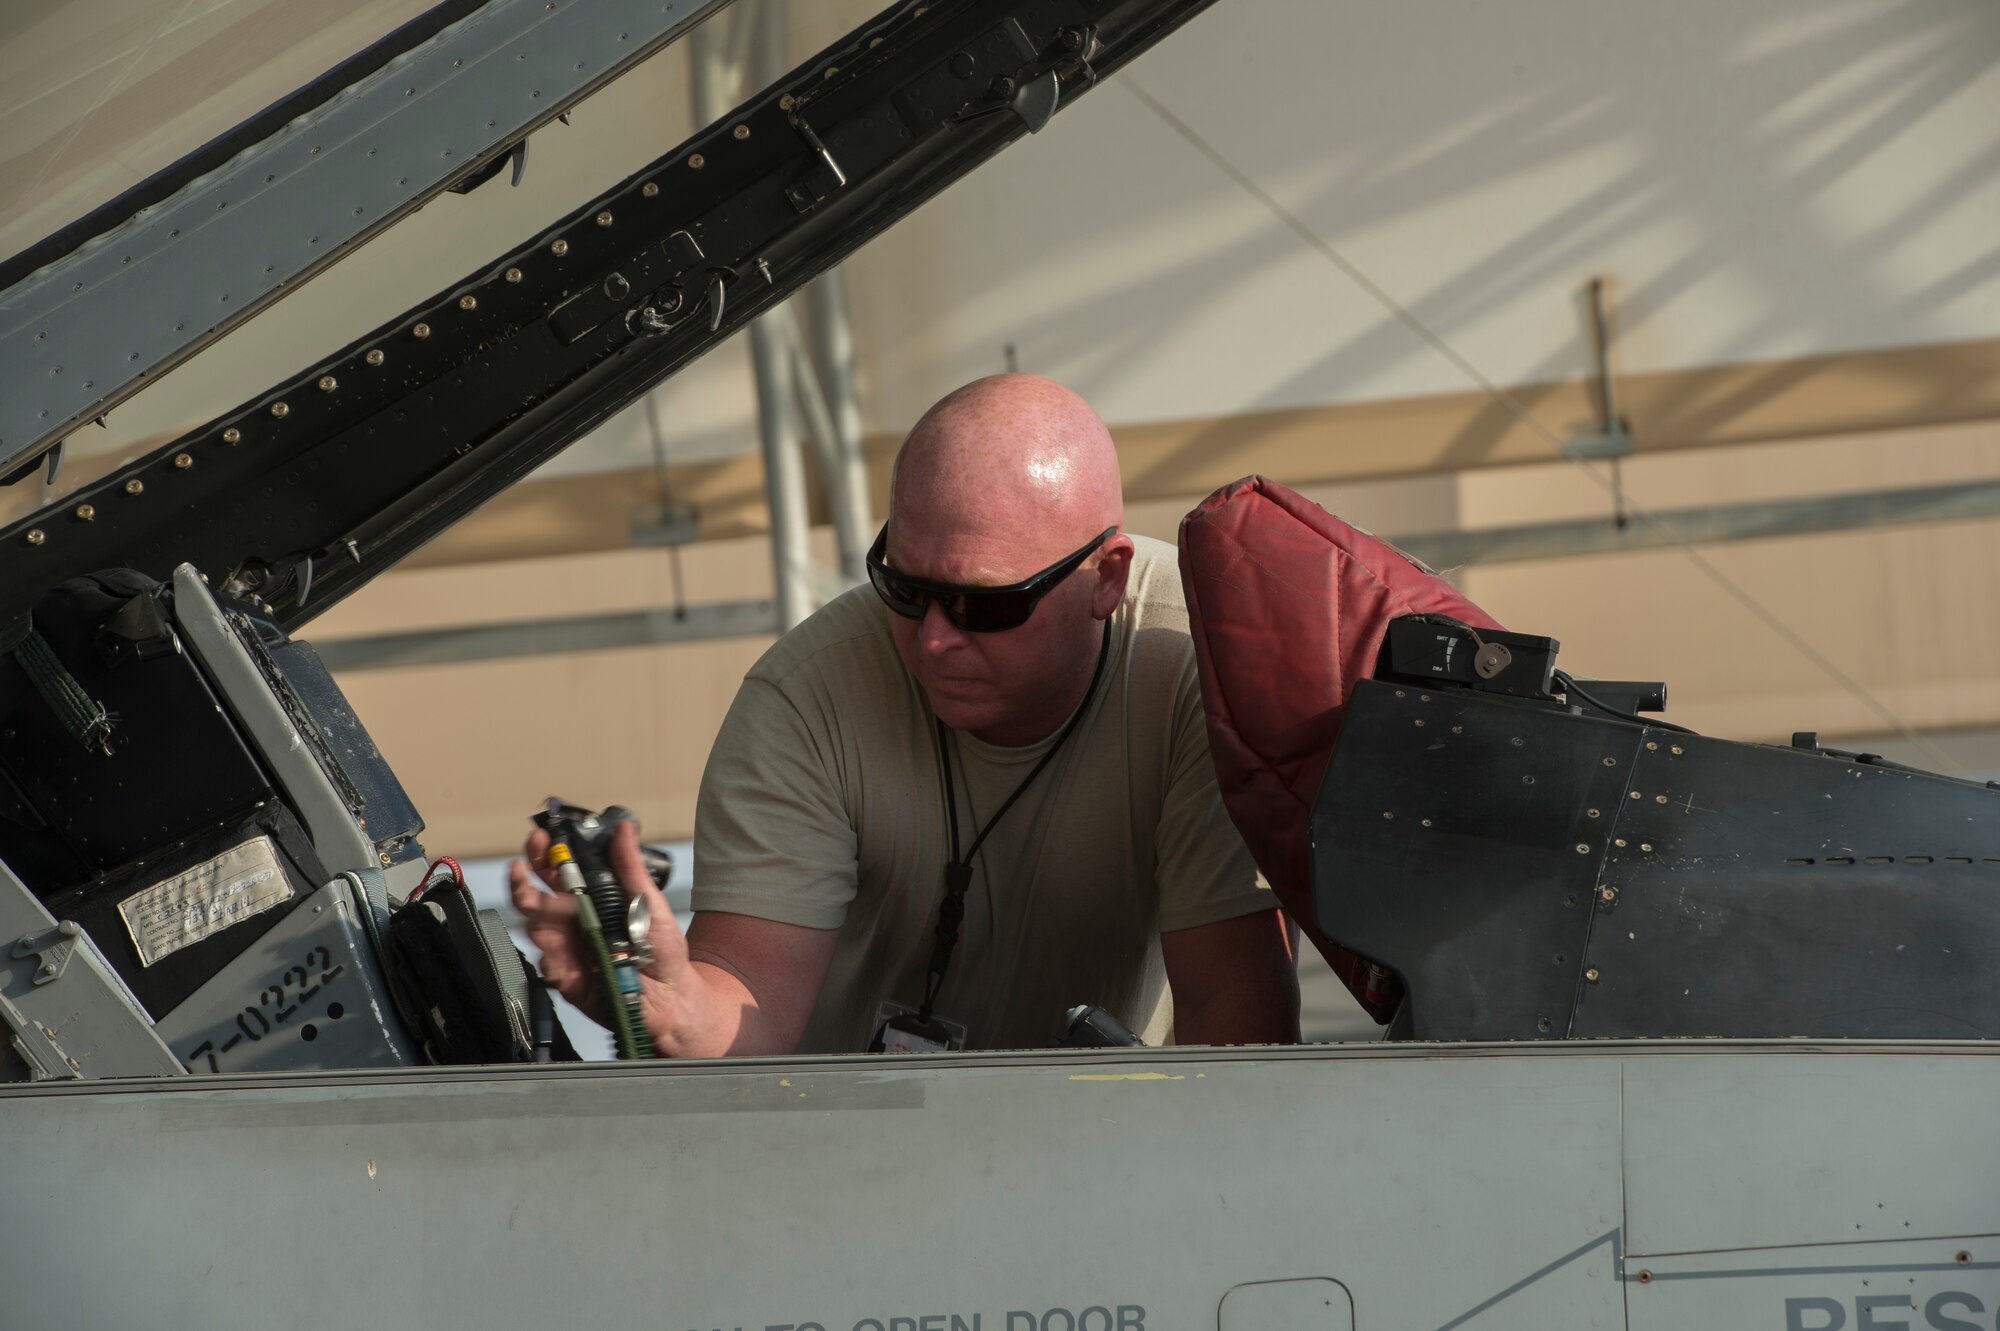 U.S. Air Force Master Sgt. William Tittsworth, 100th Fighter Squadron F-16 Fighting Falcon crew chief, performs post flight procedures at the 407th Air Expeditionary Group in Southwest Asia, Oct. 16, 2017. Aircraft Maintenance is responsible for generation of assigned aircraft. Aircraft generation is the cumulative effort required to service, inspect, maintain, launch, and recover assigned aircraft.  (U.S. Air Force photo by Staff Sgt. Sean Martin/Released)